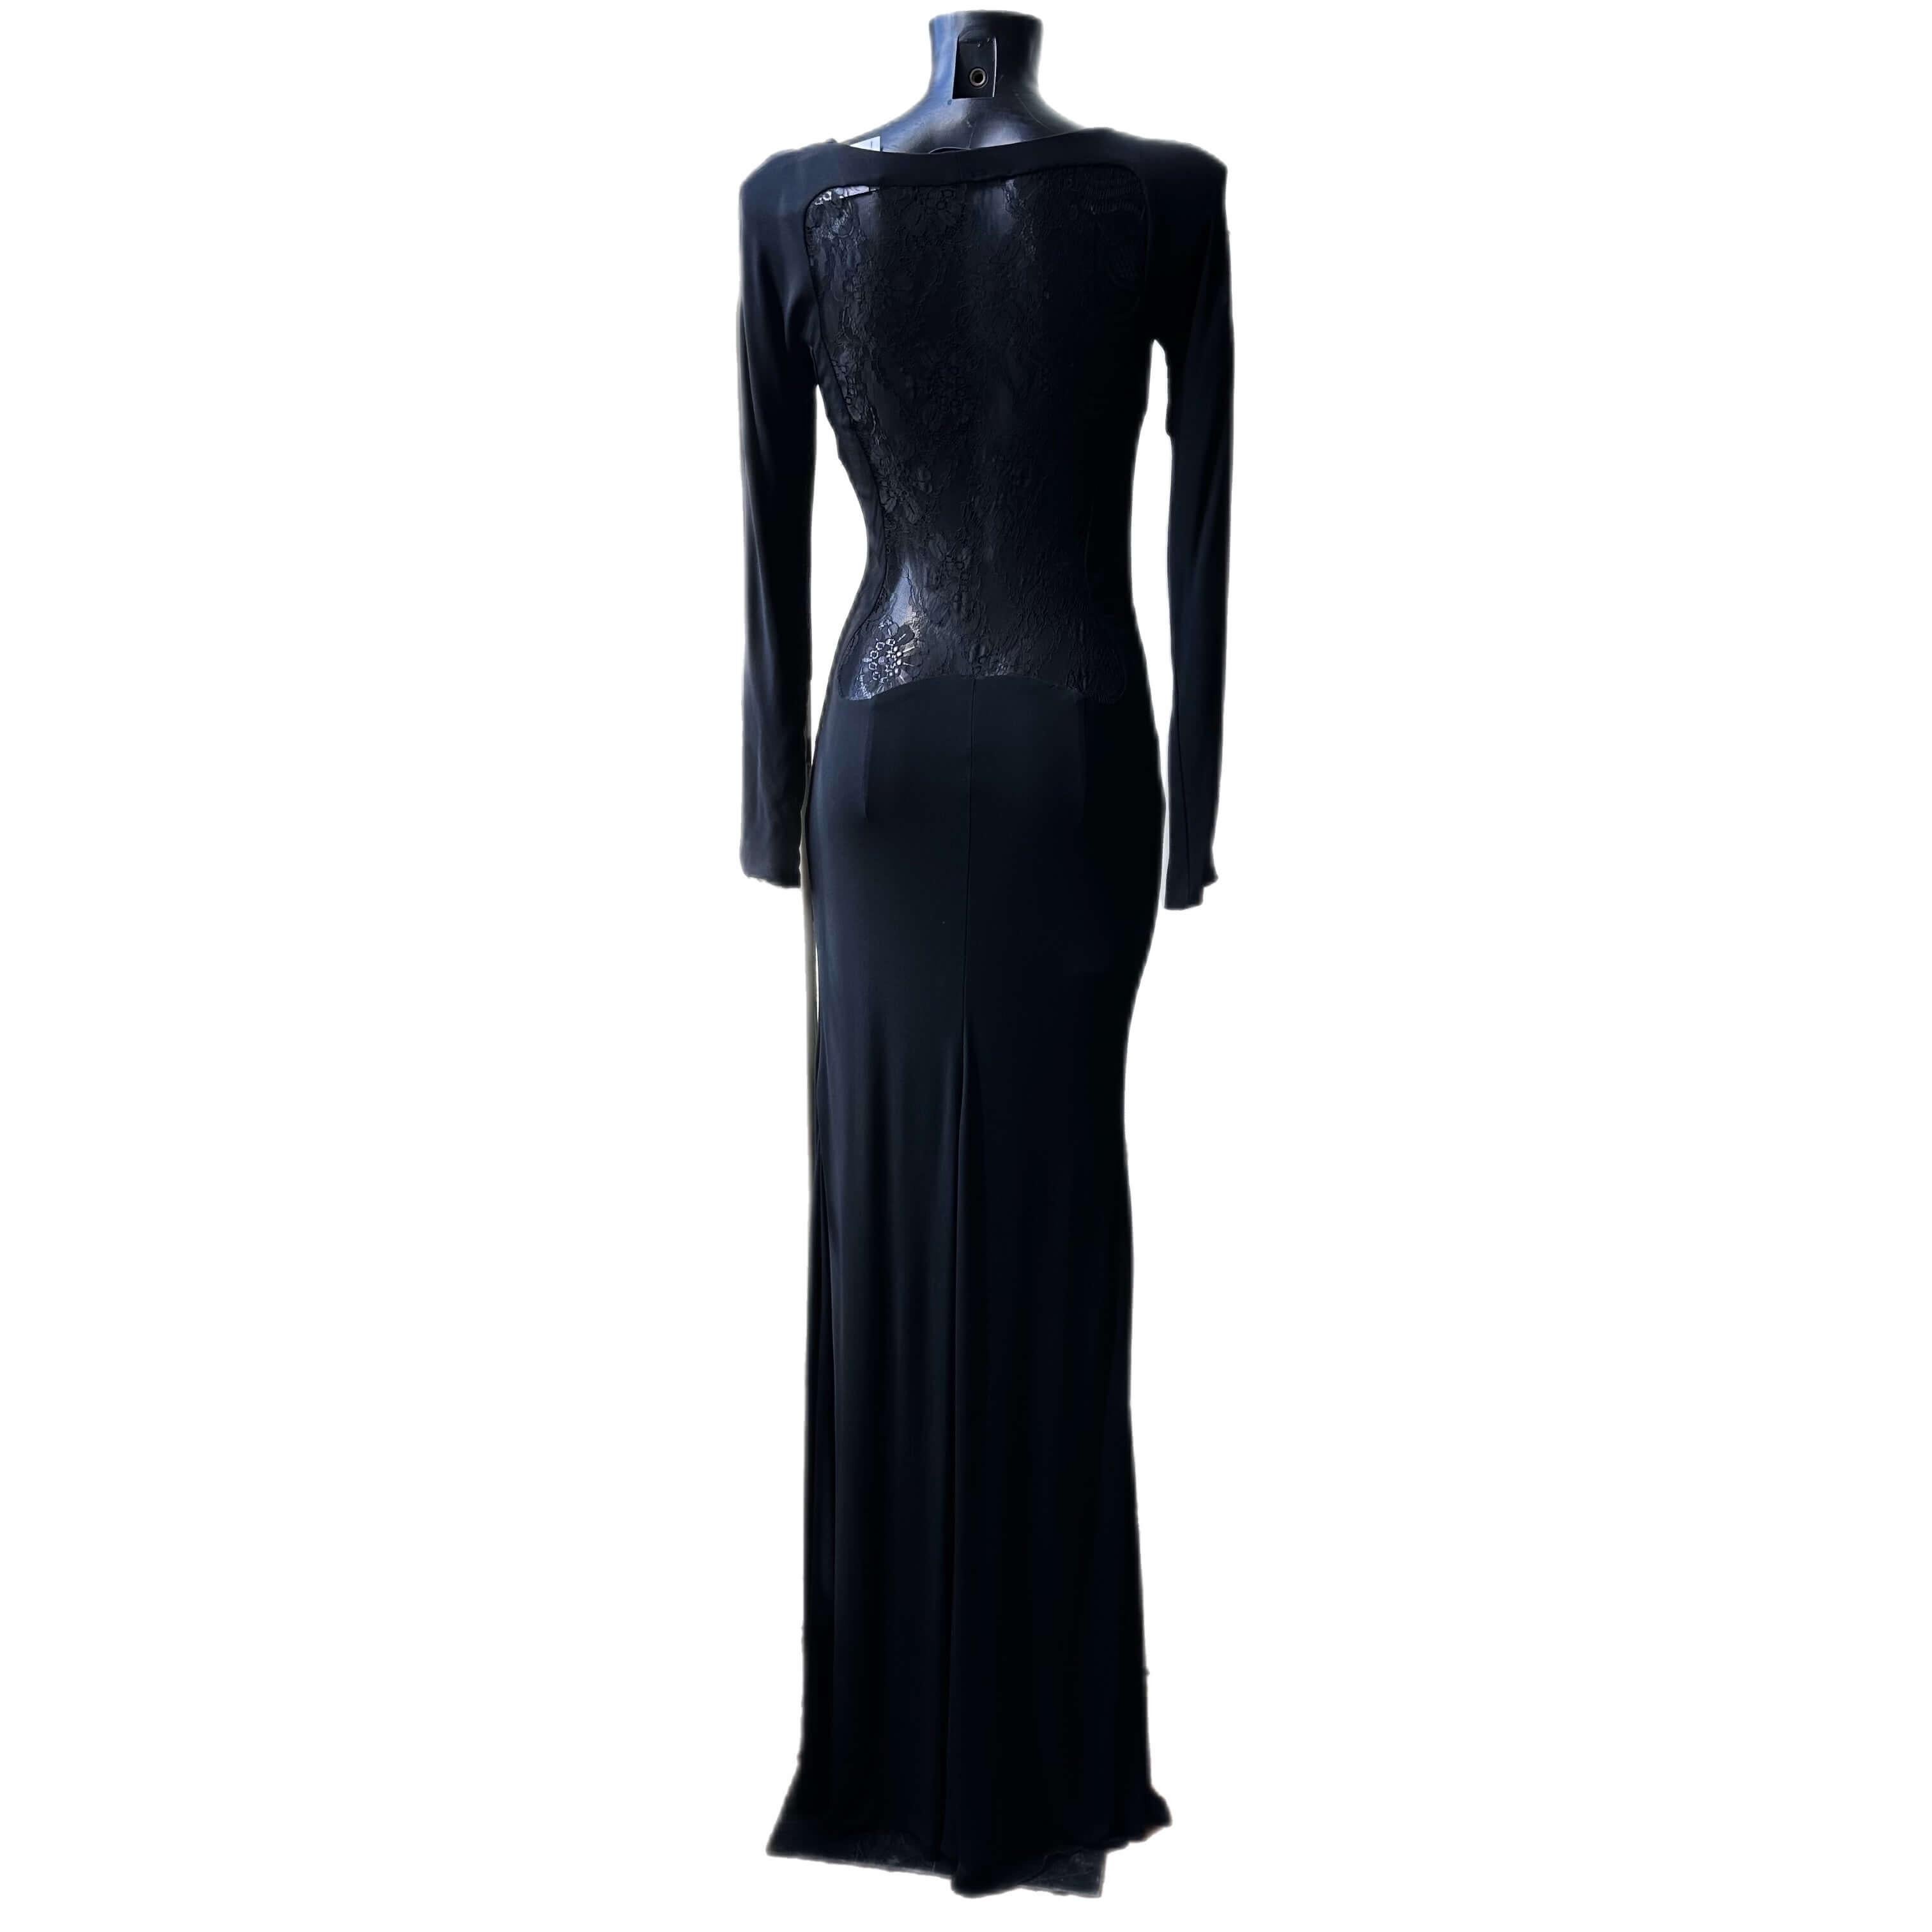 elegant and sensual, this dress by Gai Mattiolo has an enveloping fit that outlines the shapes.
black with embroidery and transparencies with deep gap of 80cm
measures:
length 188cm
shoulders 42cm
sleeve 63cm
waist 33cm
hips 38cm